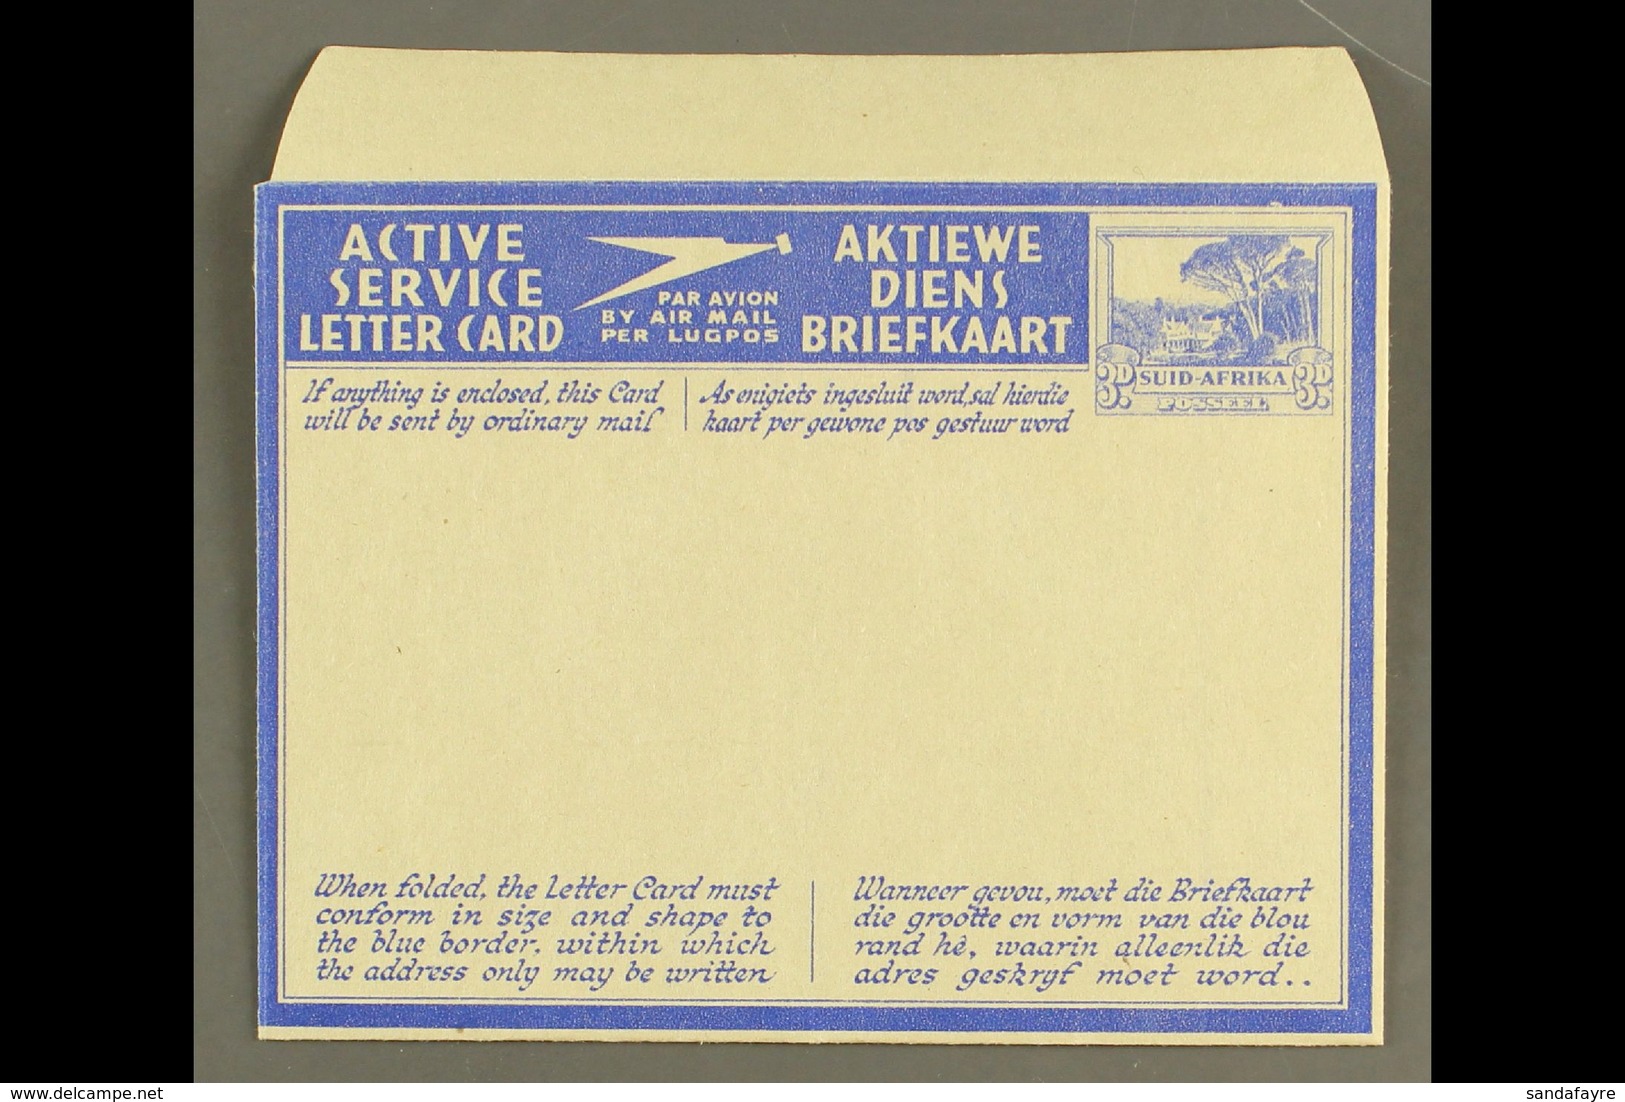 AEROGRAMME 1941 3d Ultramarine On Pale Buff With Blue Overlay, Afrikaans Stamp Impression With Tops Of Trees Touching Fr - Unclassified